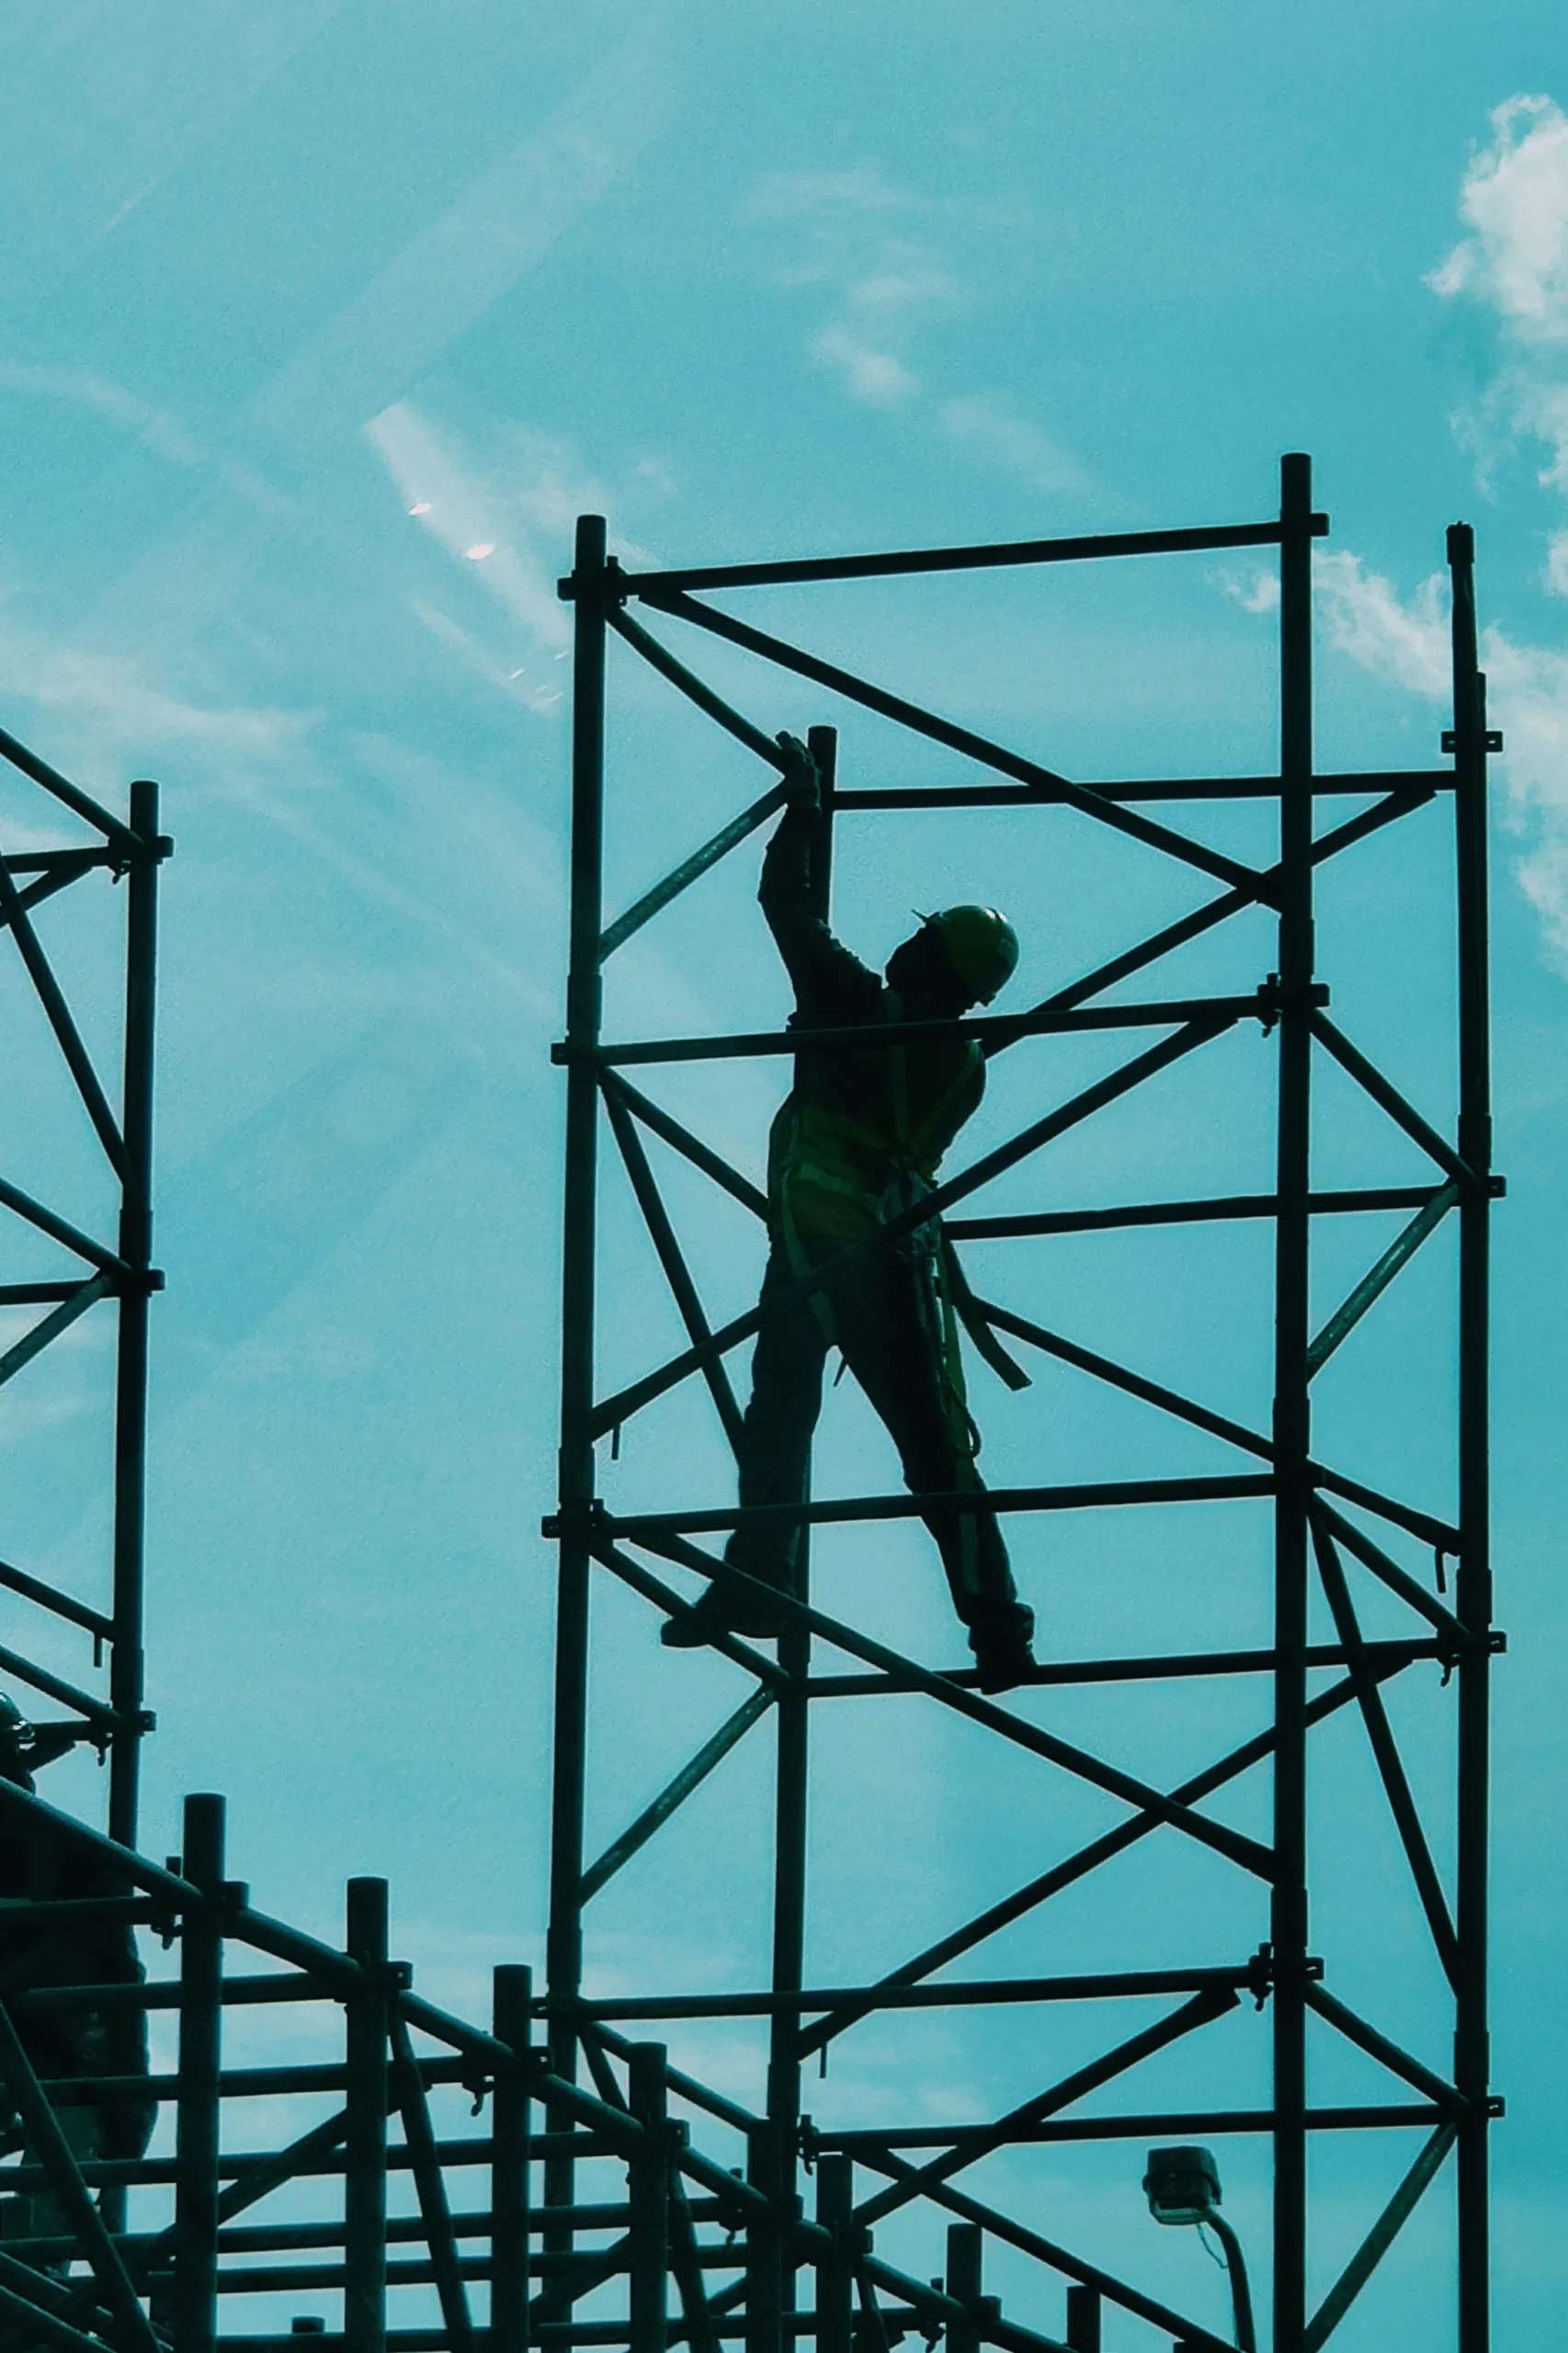 Worker on scaffolding captured by construction site surveillance